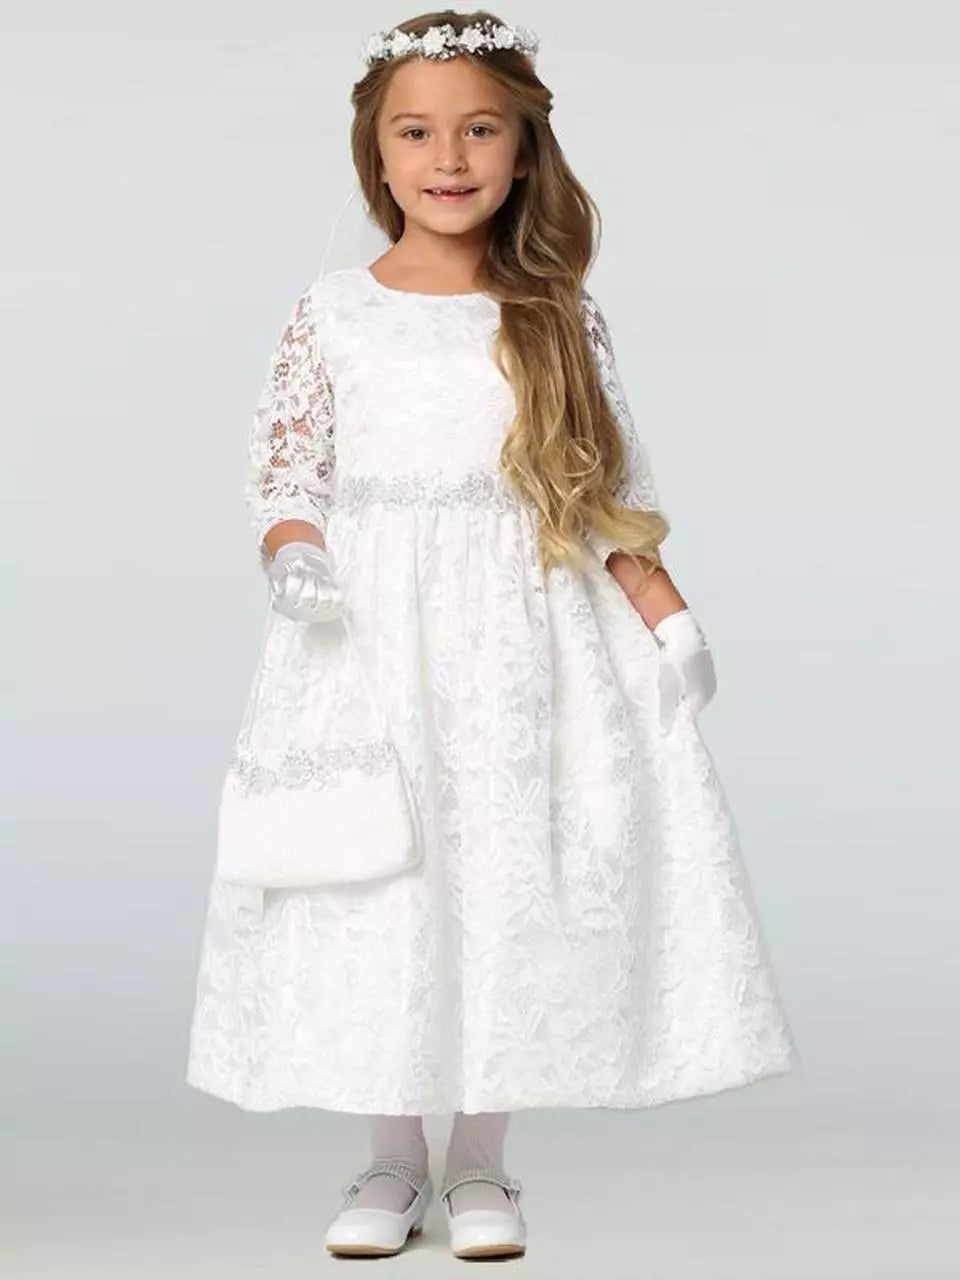 Pin on First communion ideas!